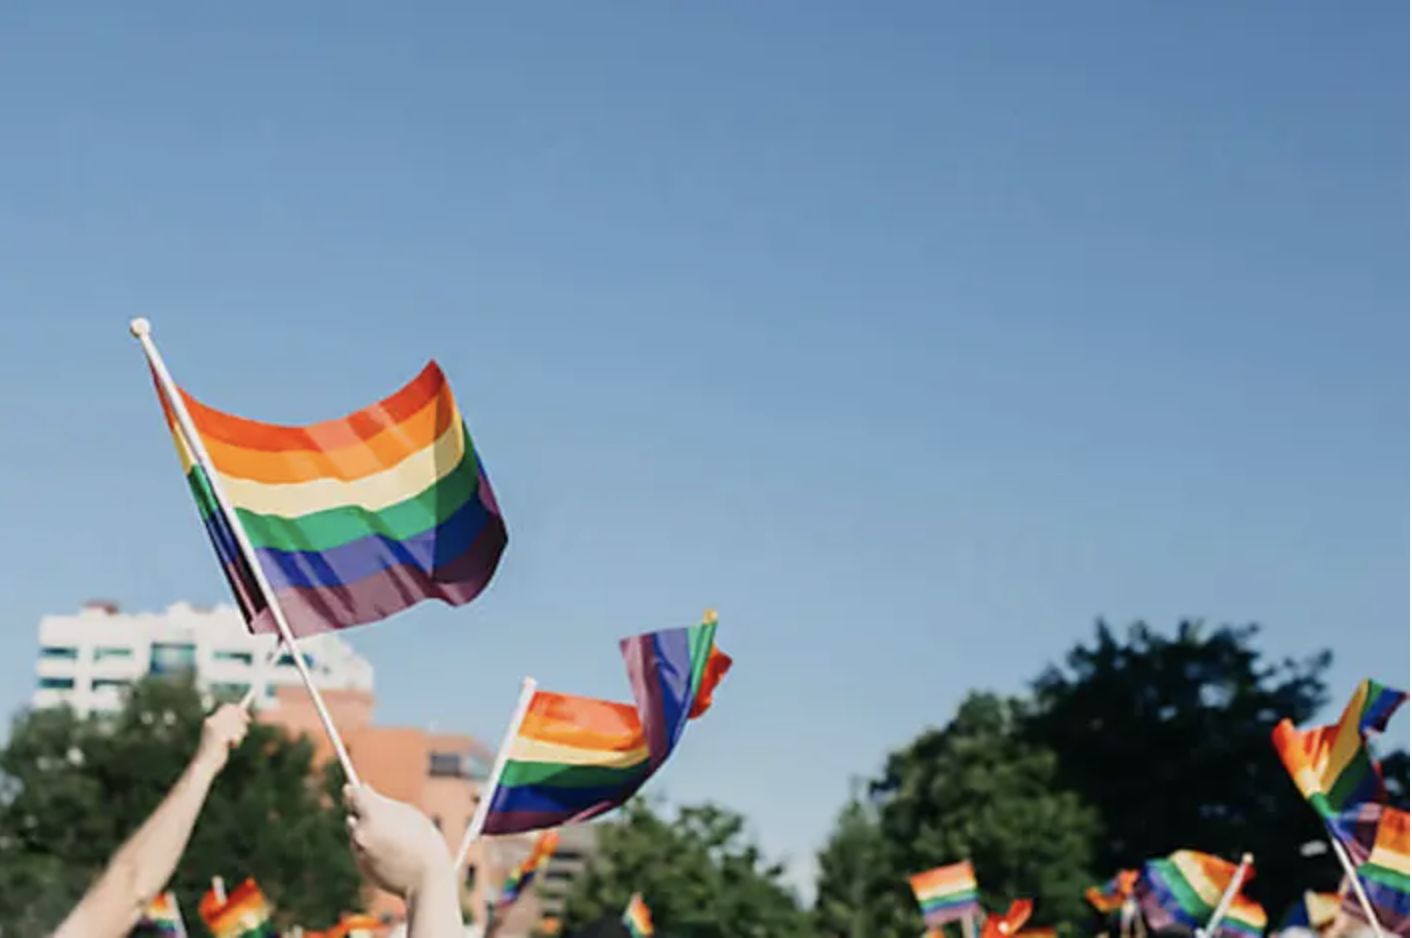 Hands waiving rainbow flags in the air against a blue sky.